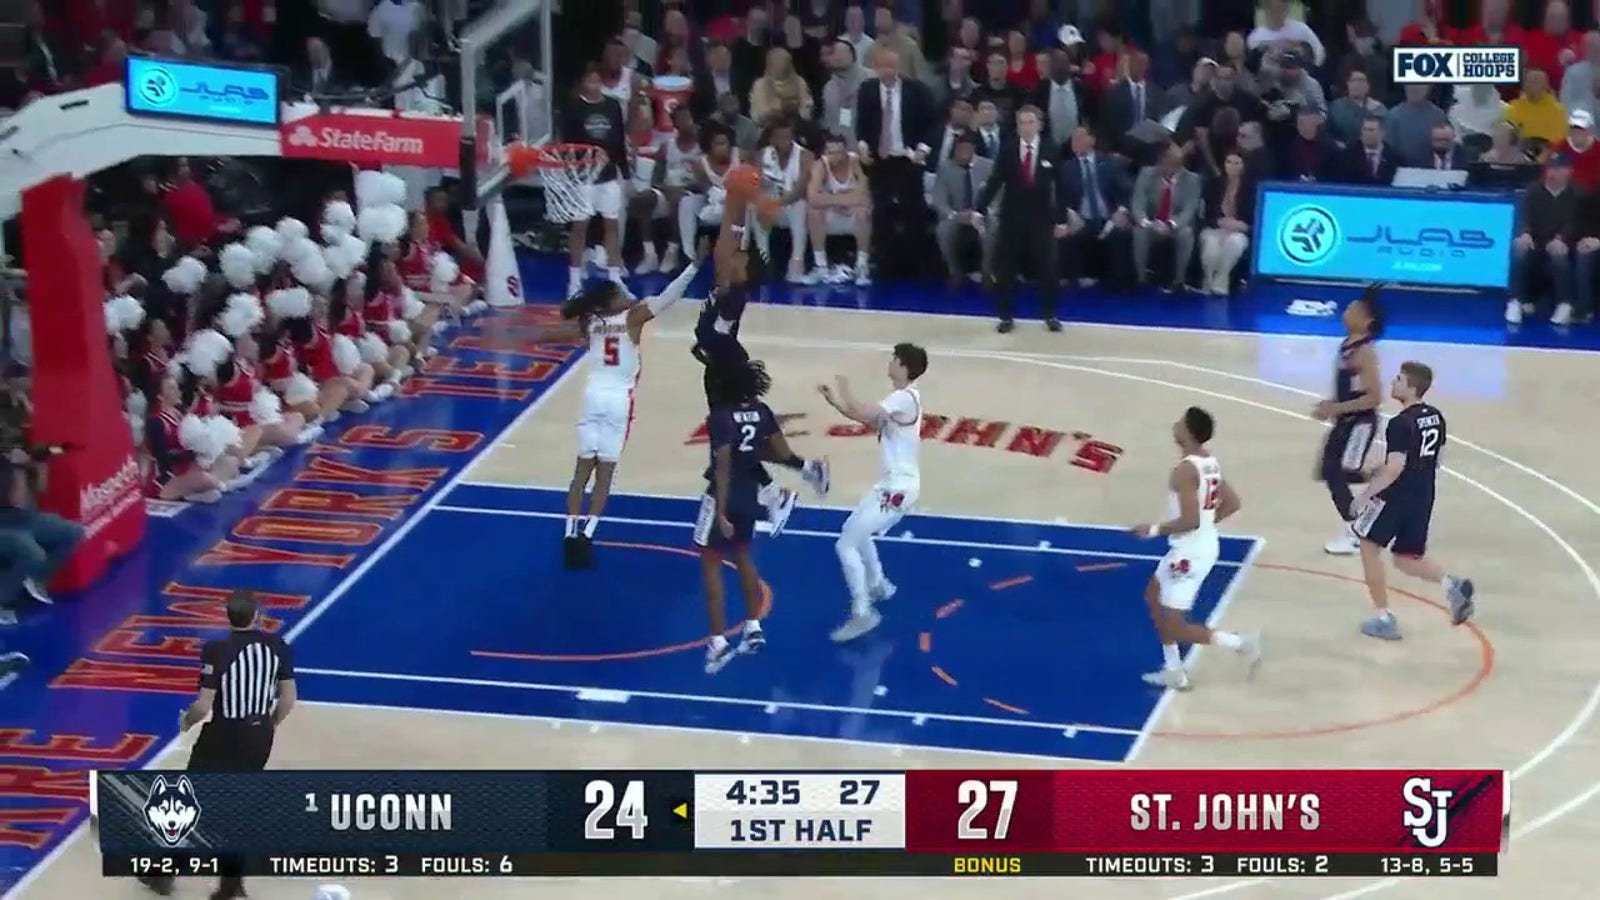 UConn's Tristen Newton spins and finds Stephon Castle for the two-handed flush in transition against St. John's